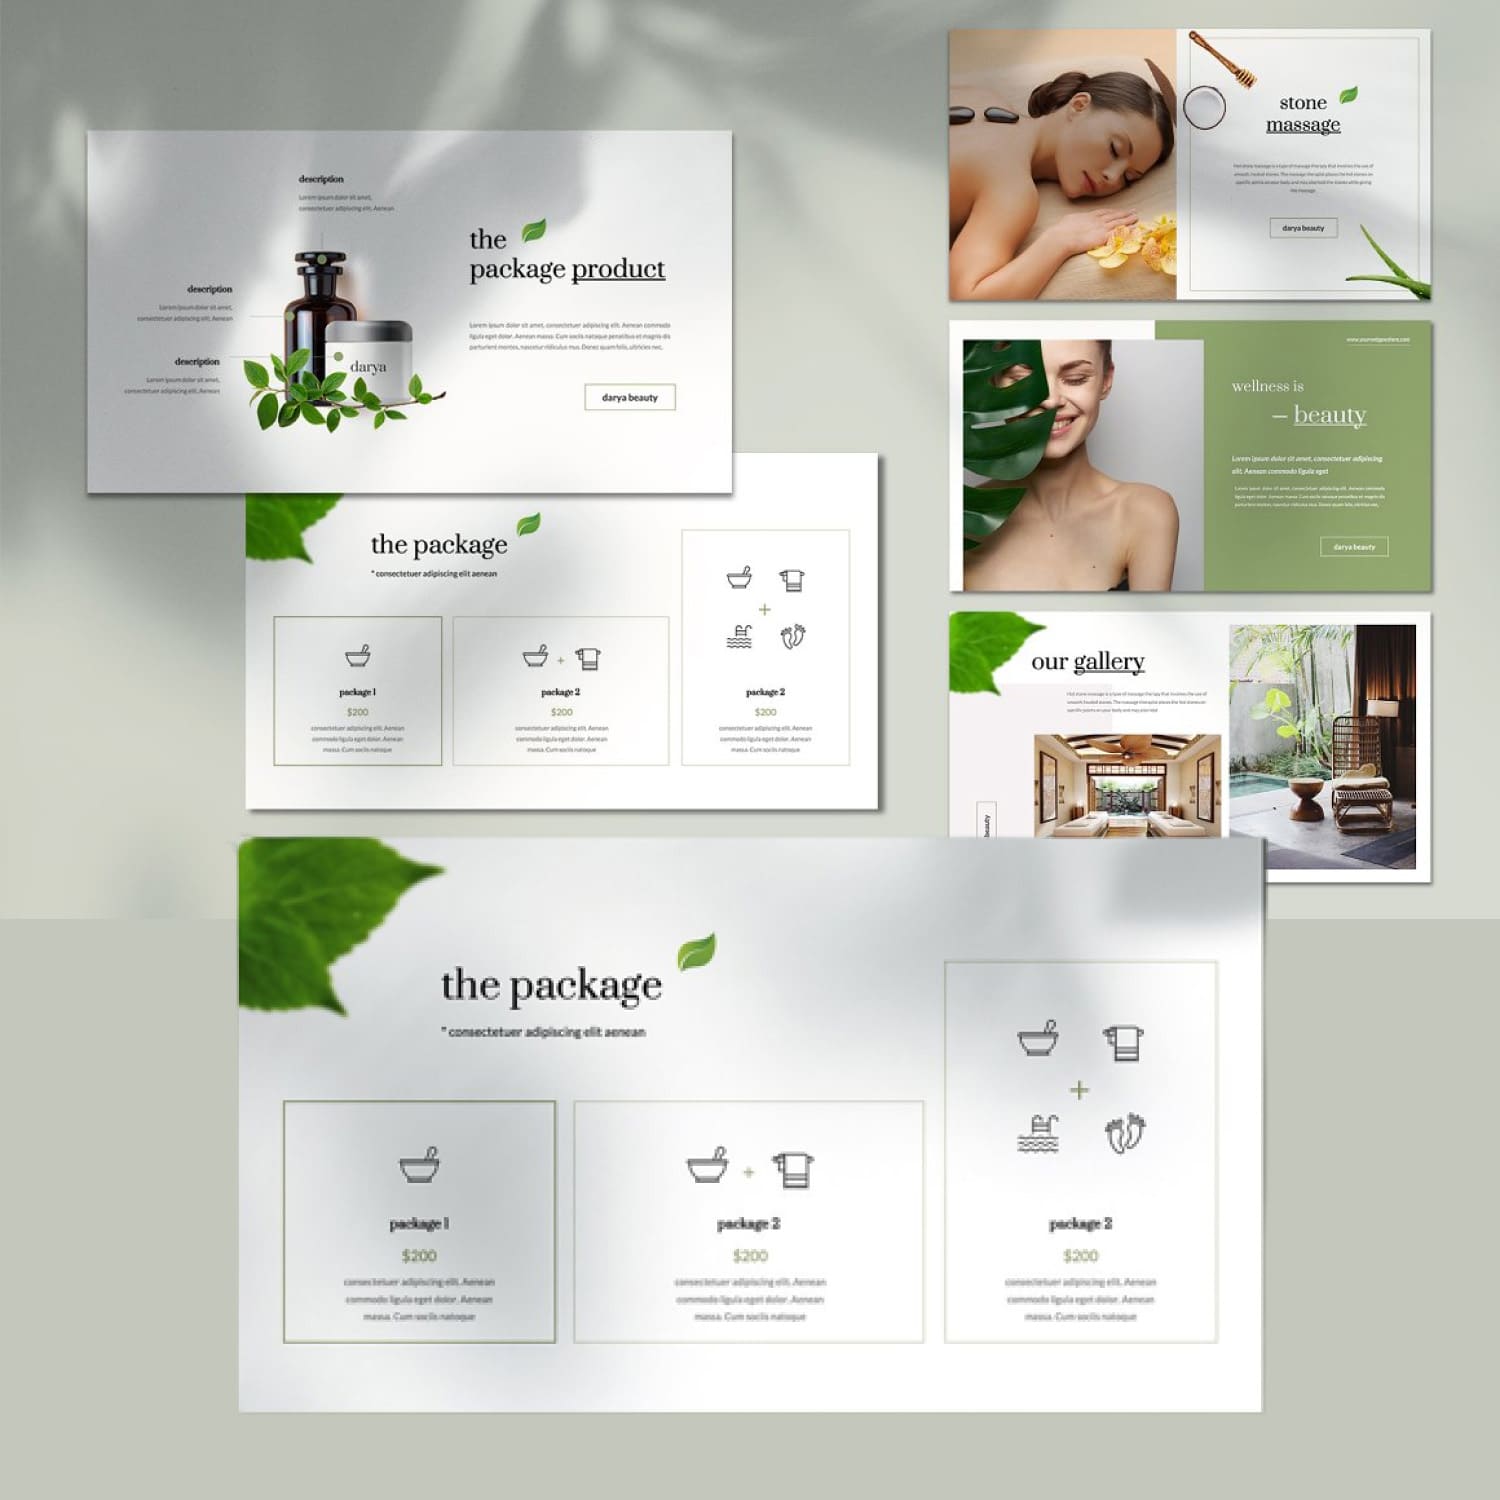 Darya - Beauty Powerpoint Template cover.